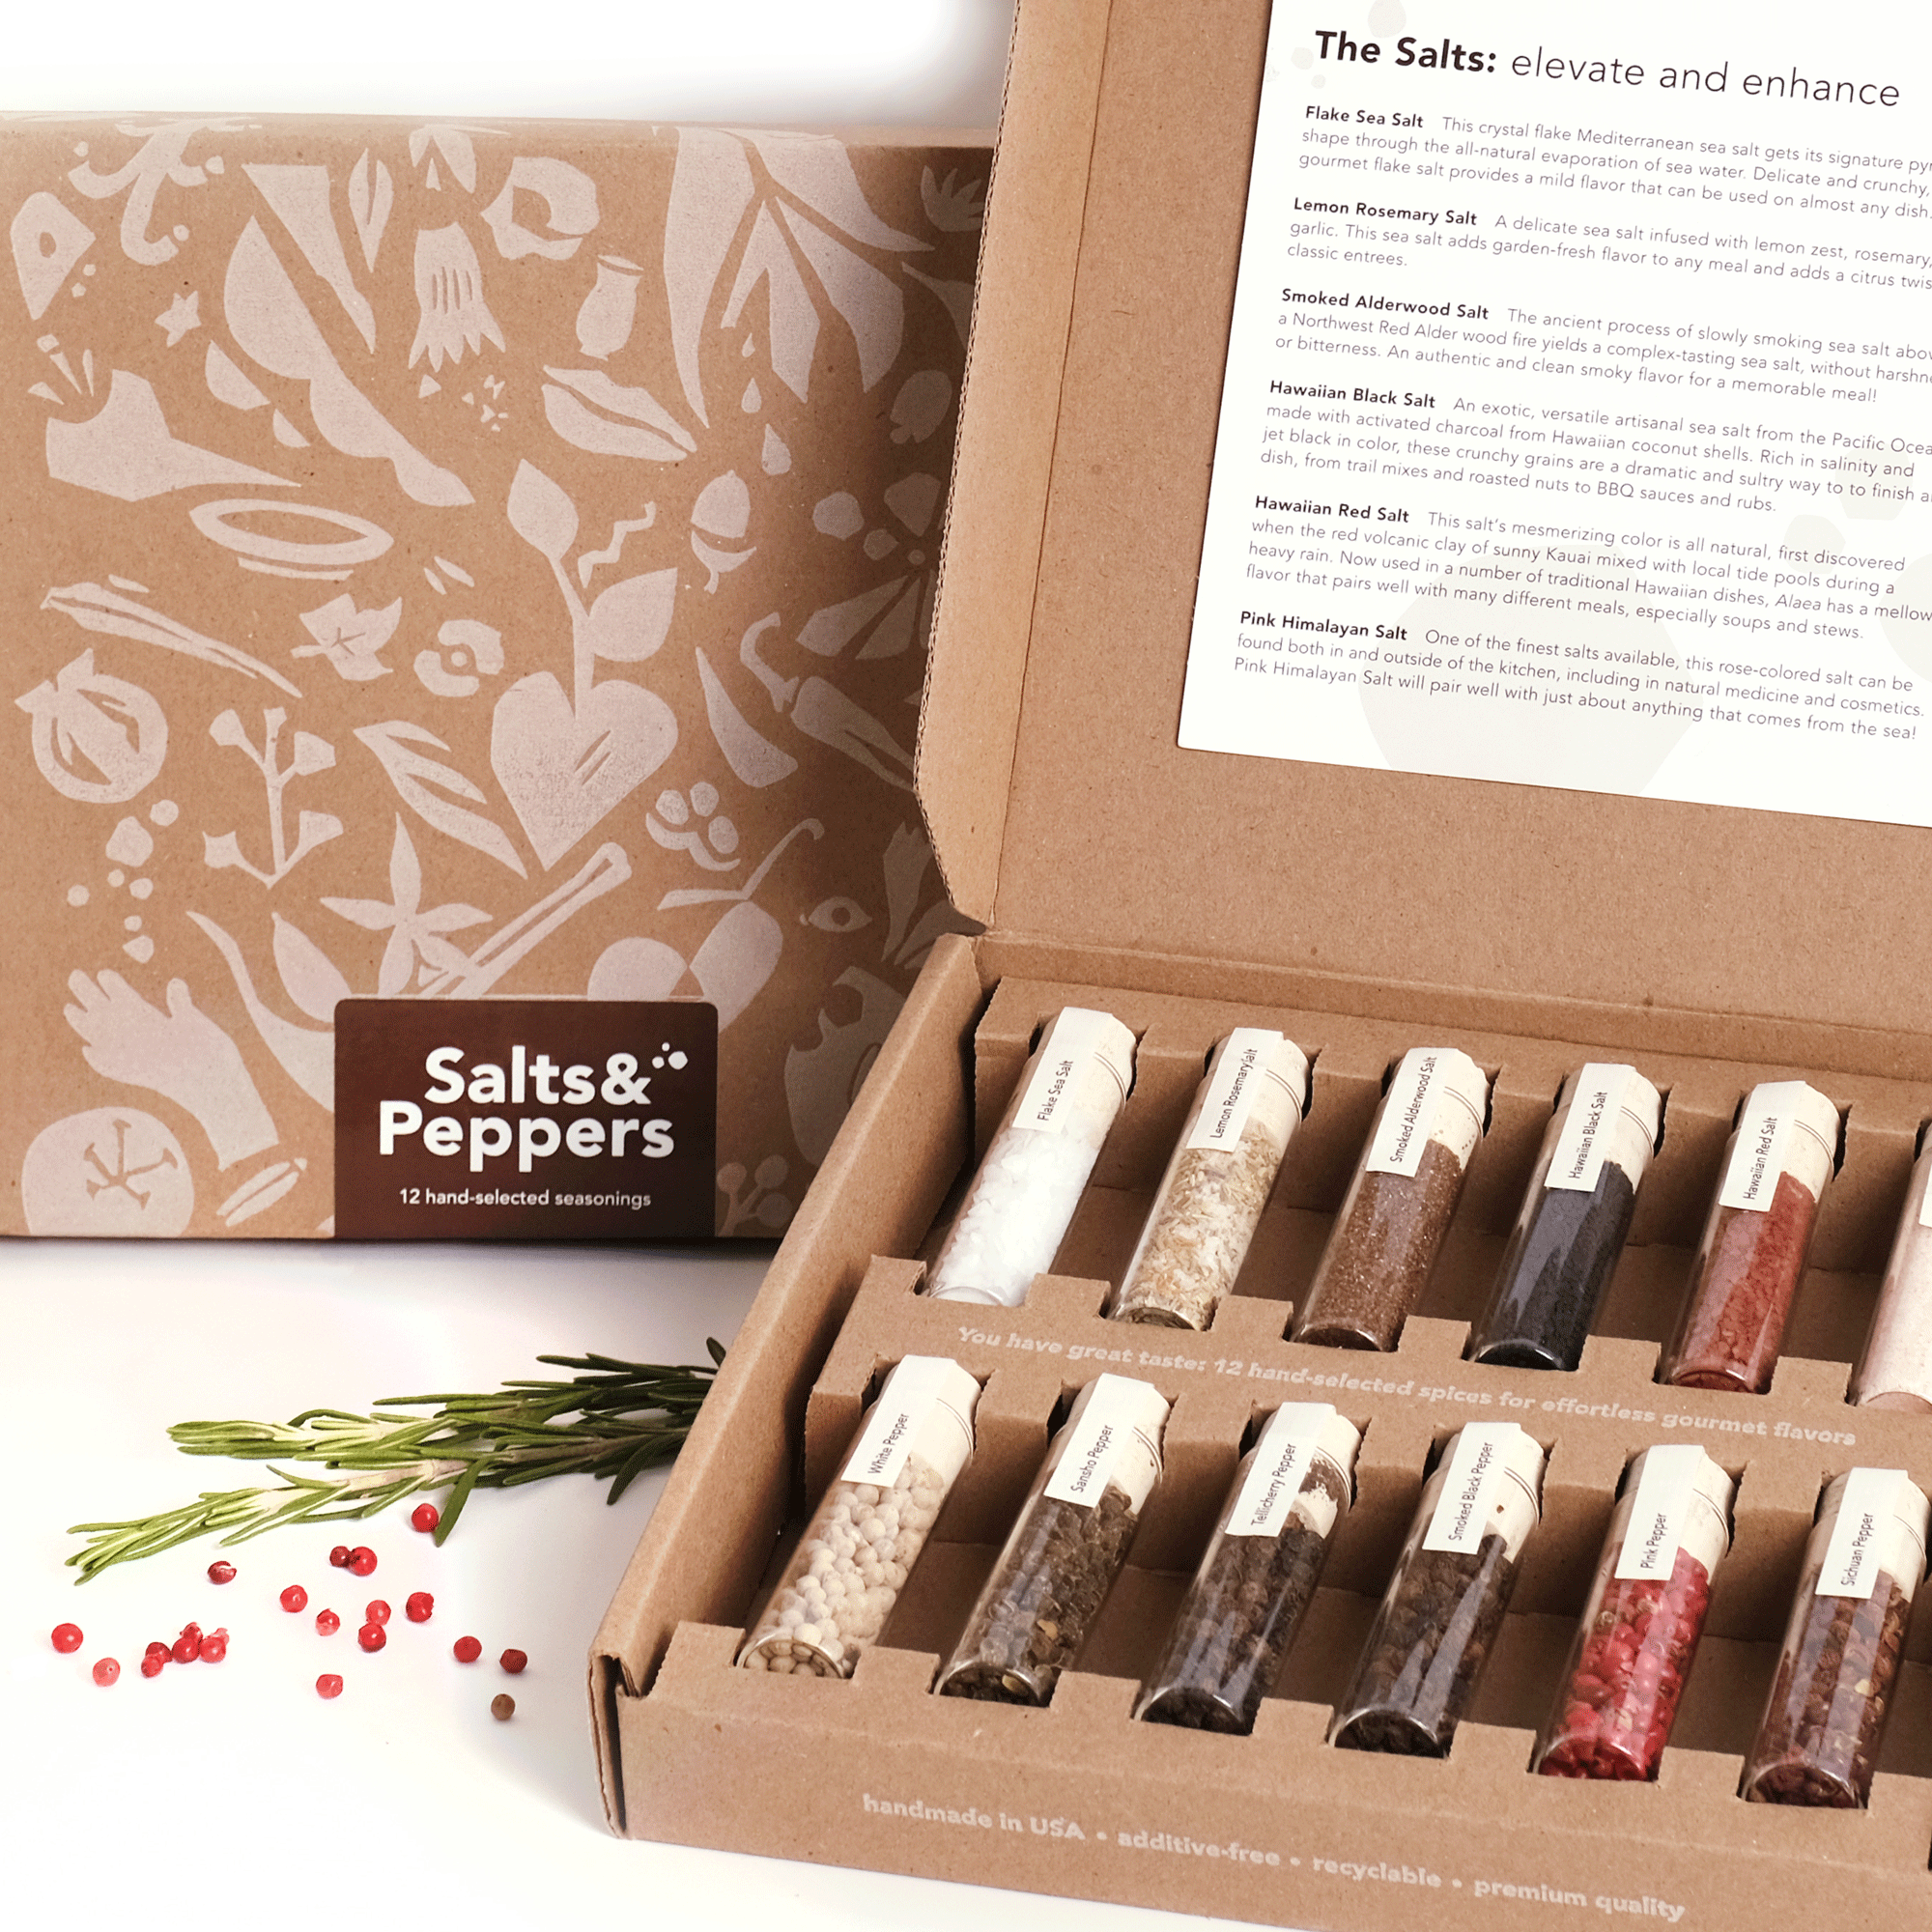 Salts & Peppers Gift Box - 6 Salts & 6 Peppers